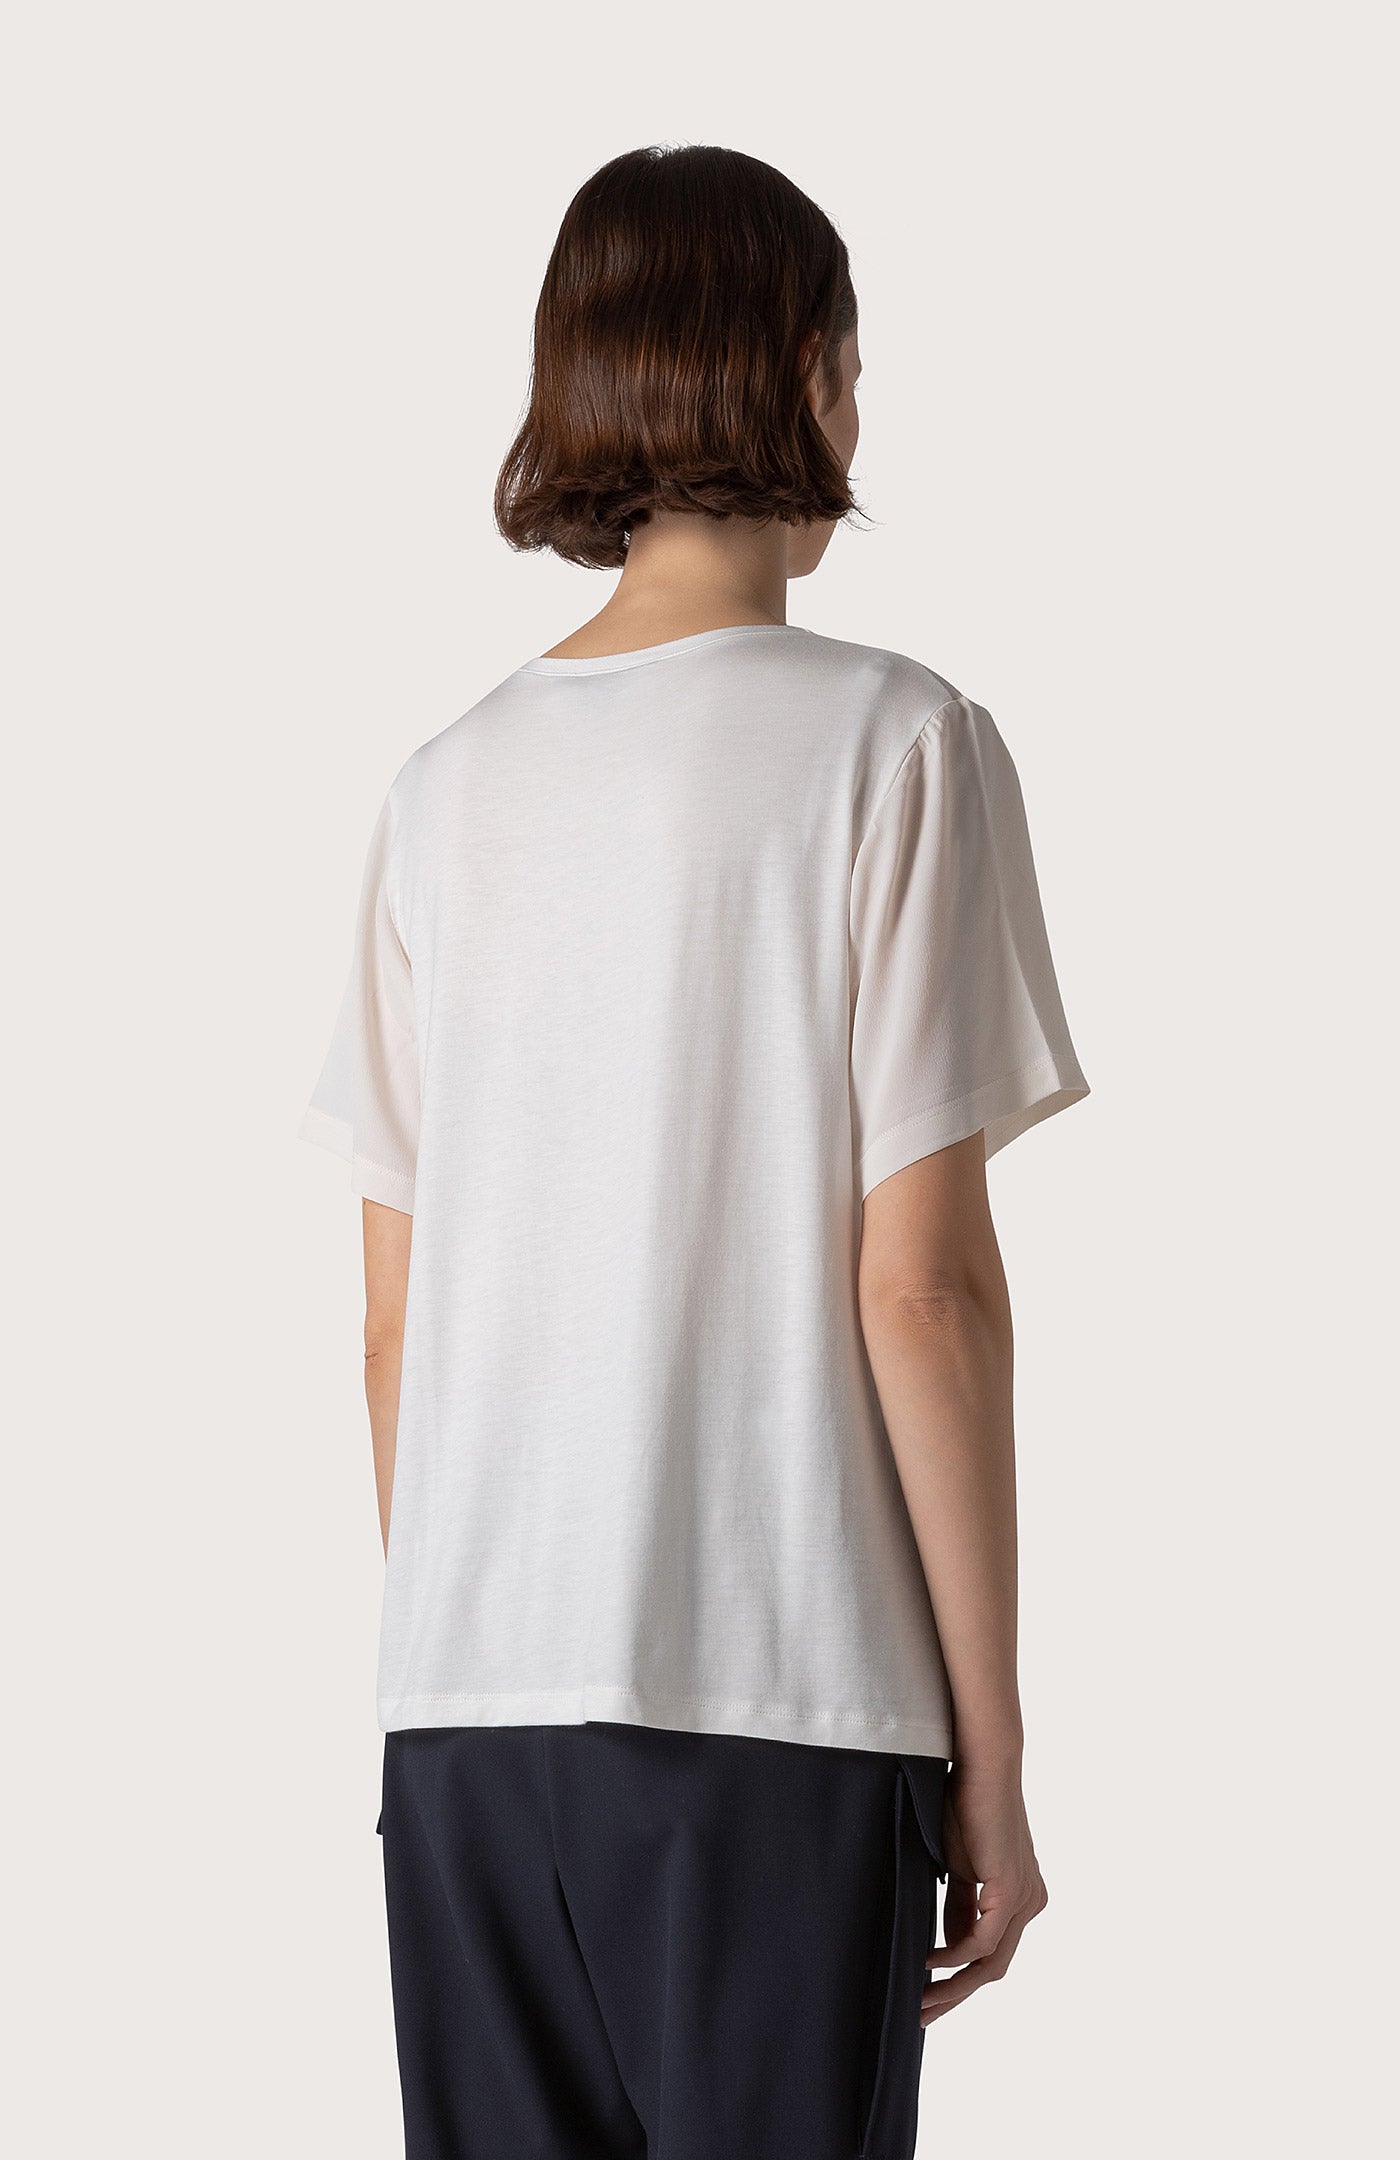 Women's T-Shirt with elegant lines